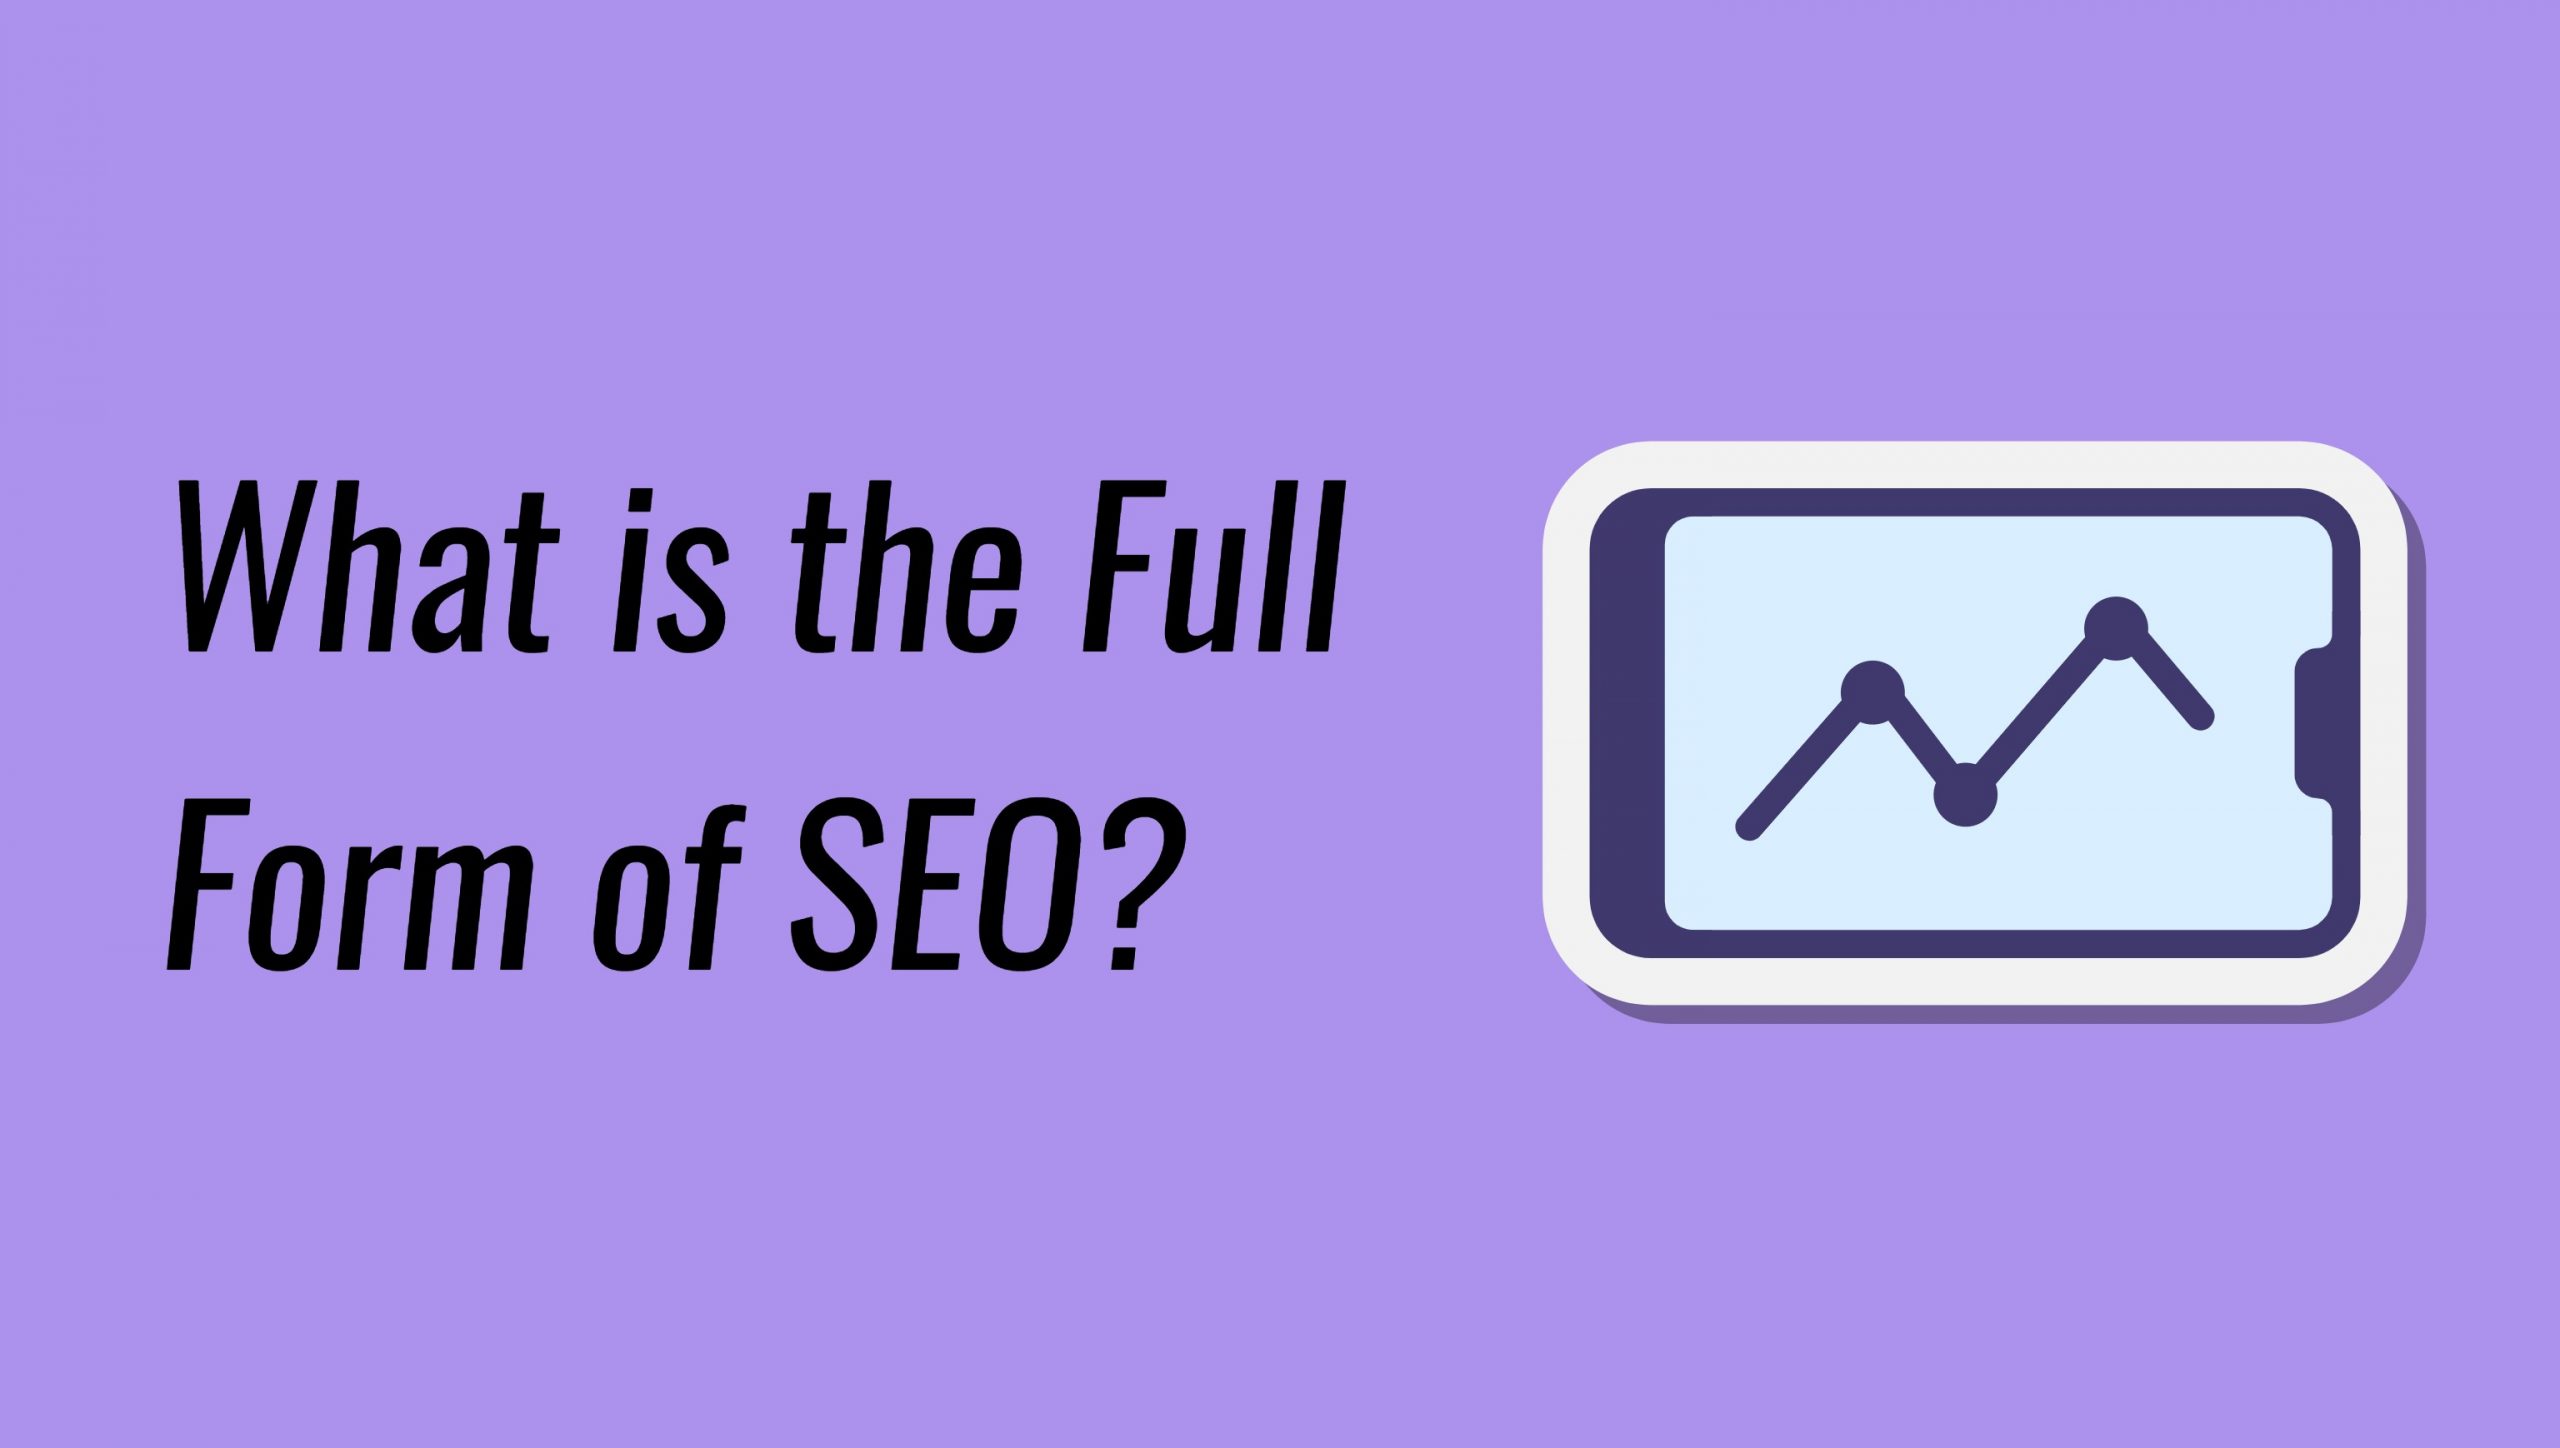 What is the Full Form of SEO